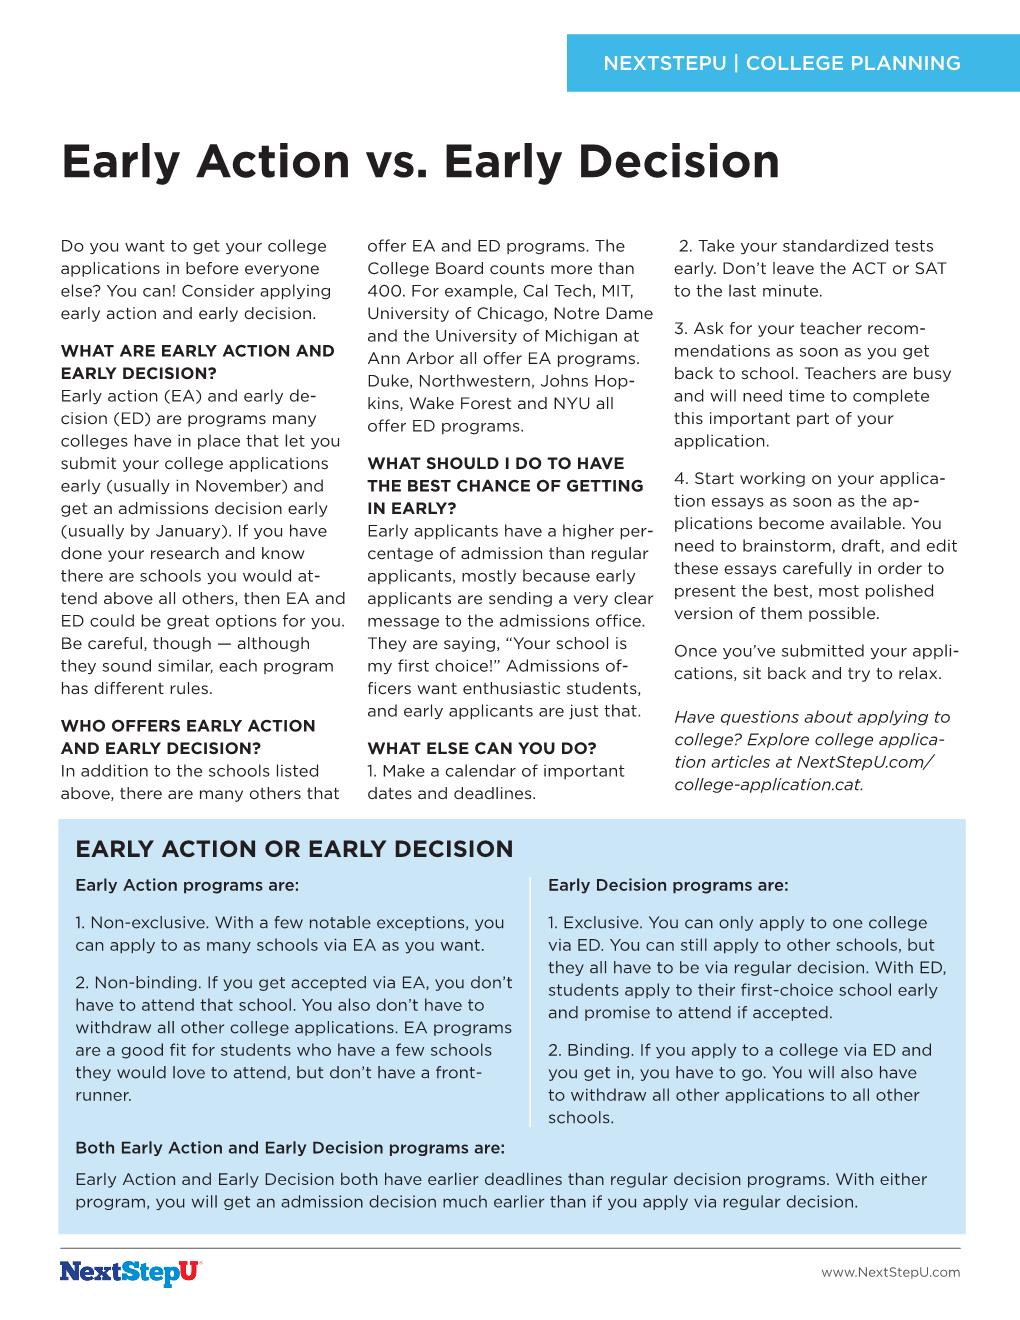 Early Action Vs. Early Decision